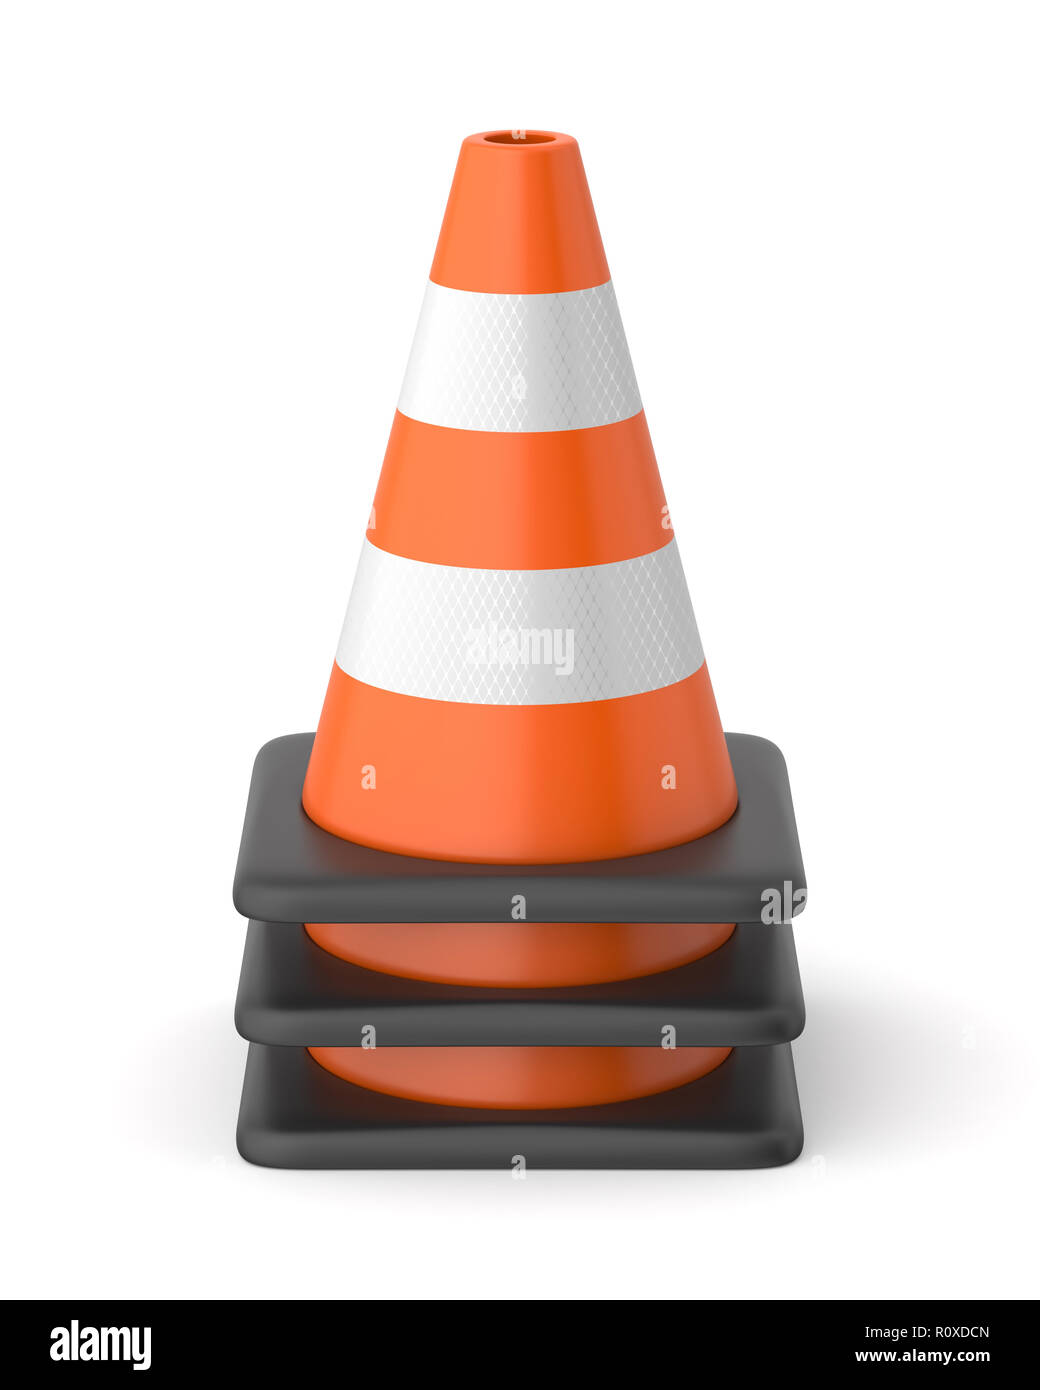 3d rendered stack of orange, black and white striped traffic cones on a white background. Stock Photo